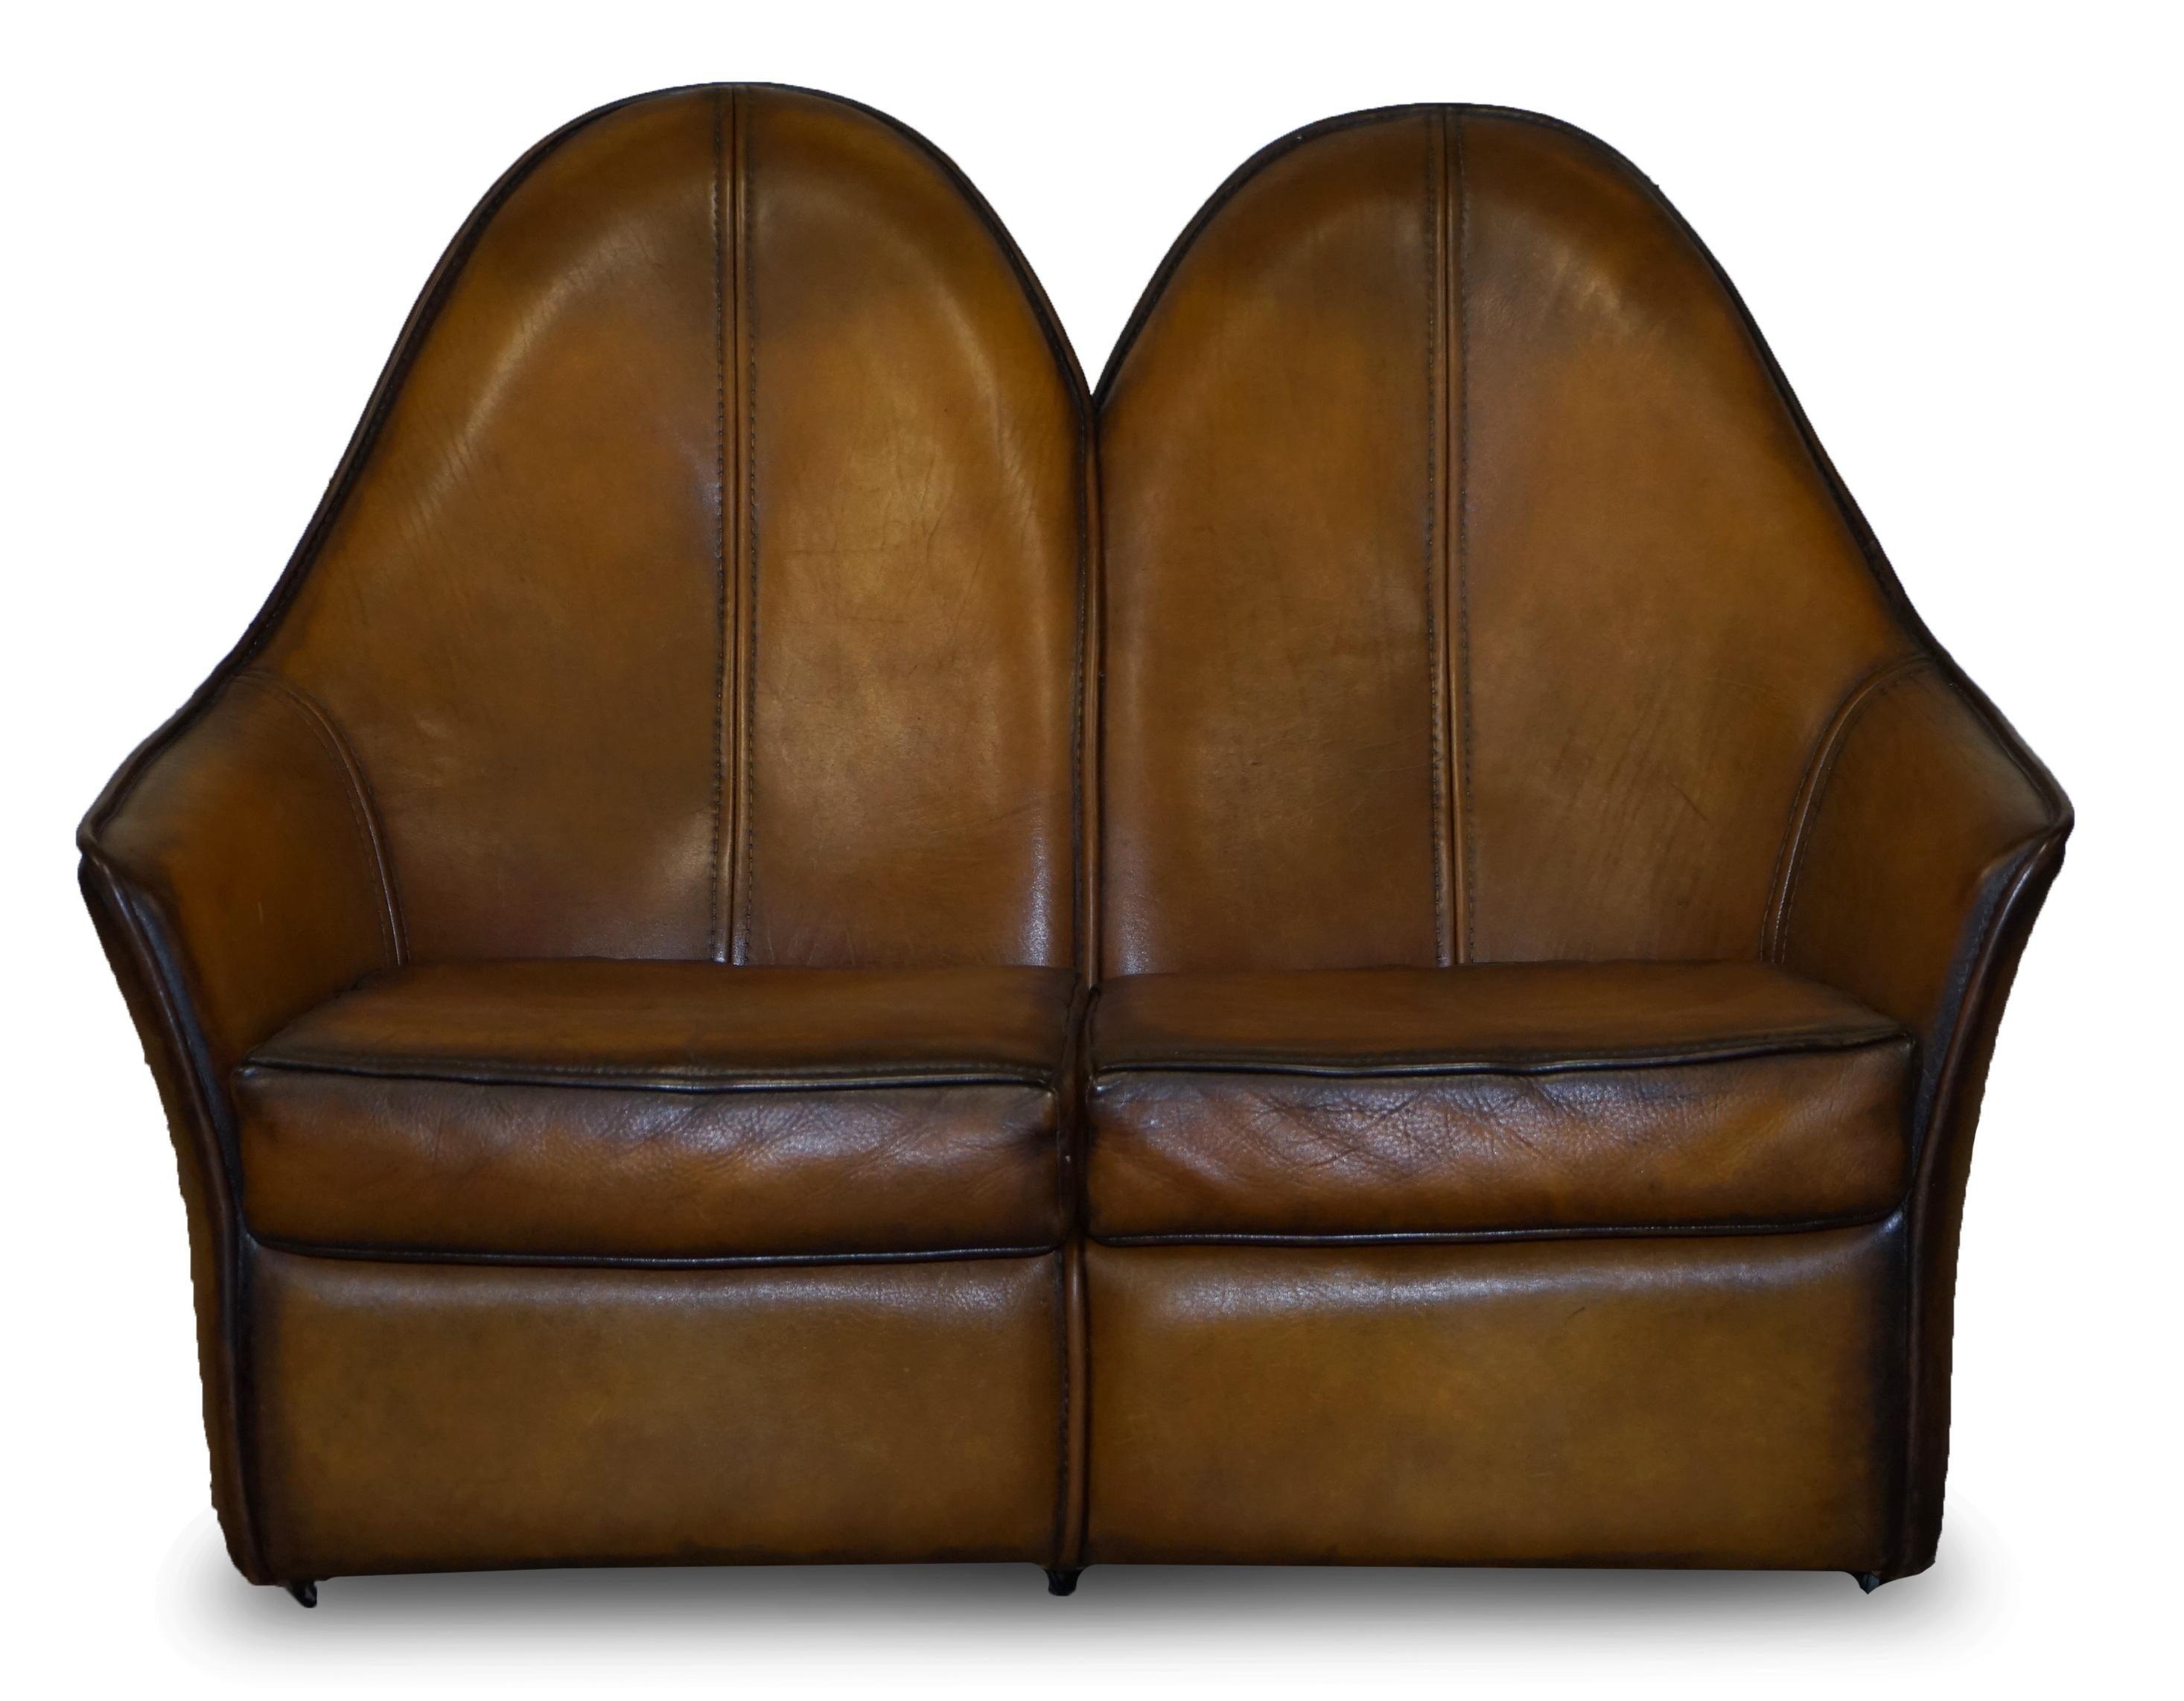 We are delighted to offer for sale this stunning fully restored vintage hand dyed Cigar brown leather Art modern two-seat sofa which is part of a large suite

As mentioned this is part of a suite, in total I have a pair of armchairs, a two seat